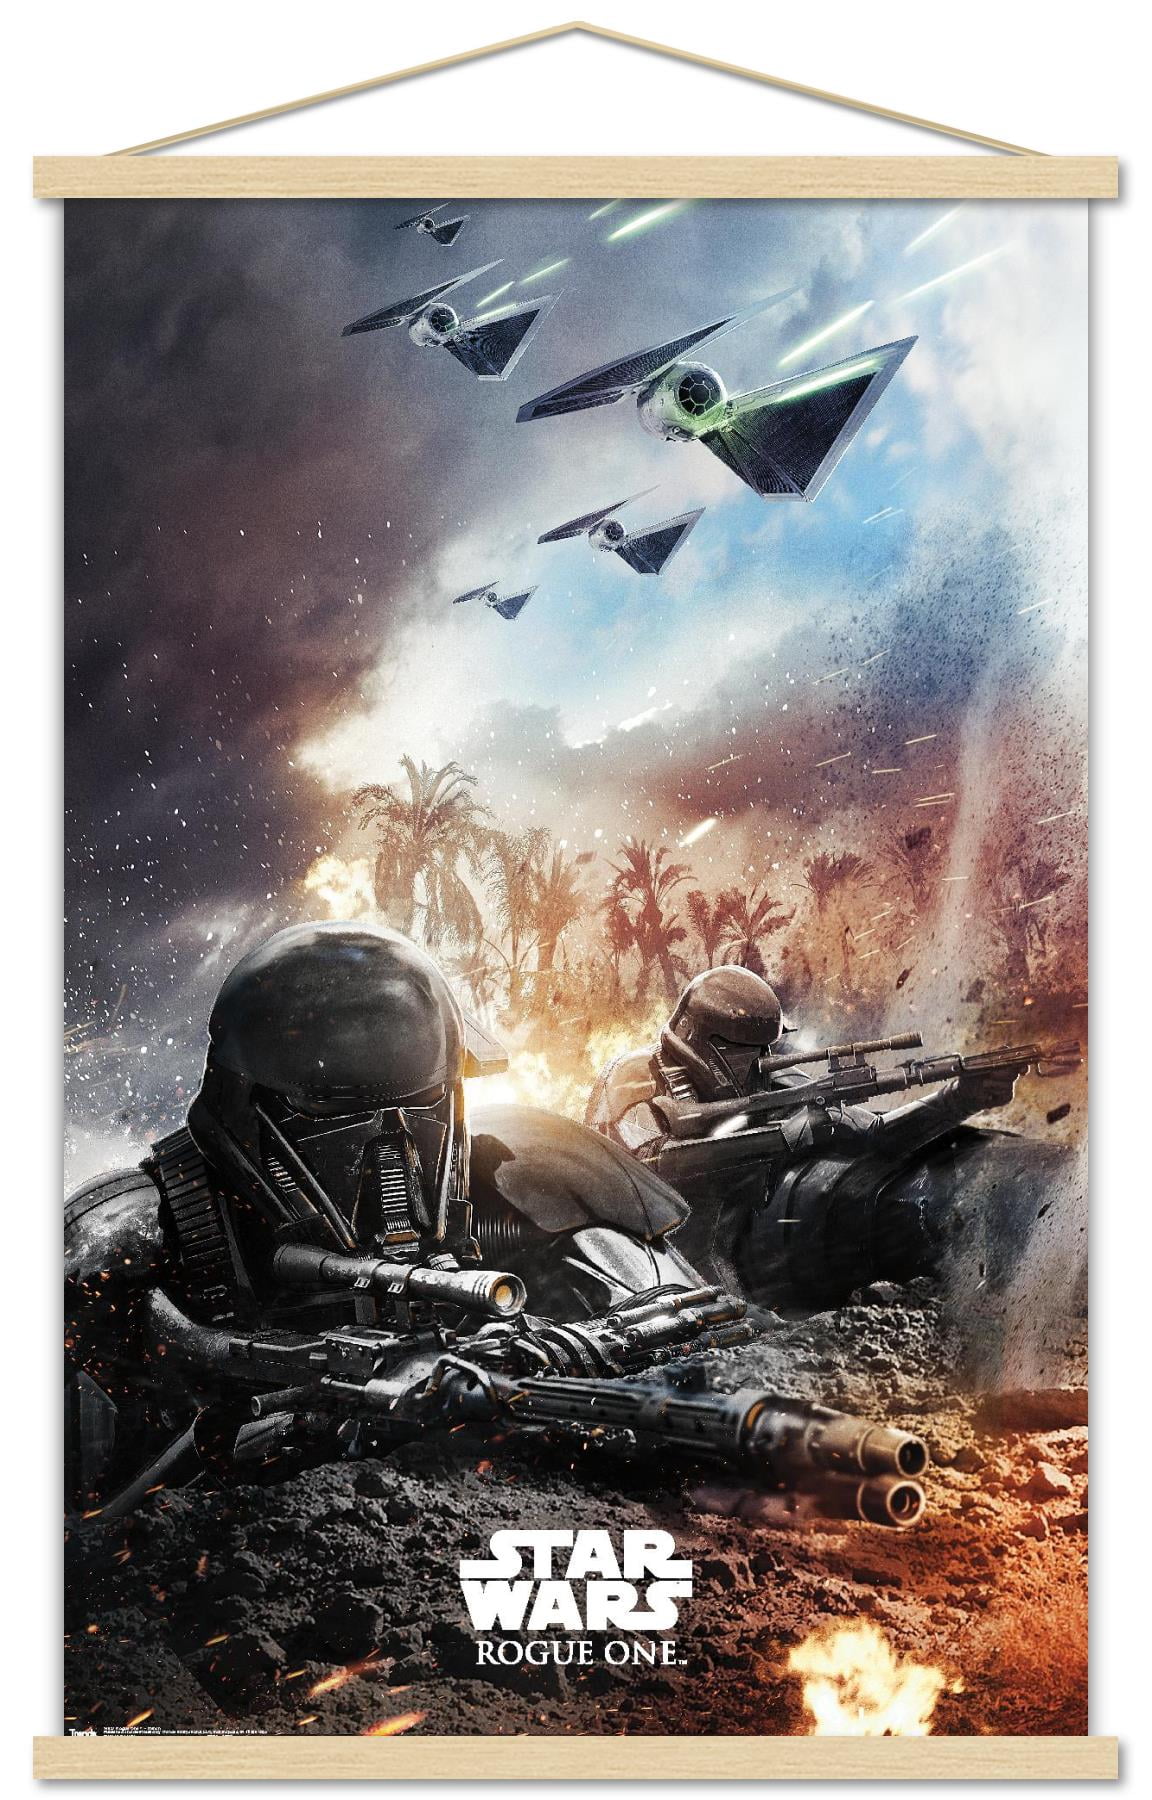 Star Wars: Rogue One - Trench Wall Poster, 22.375 x 34 - Walmart